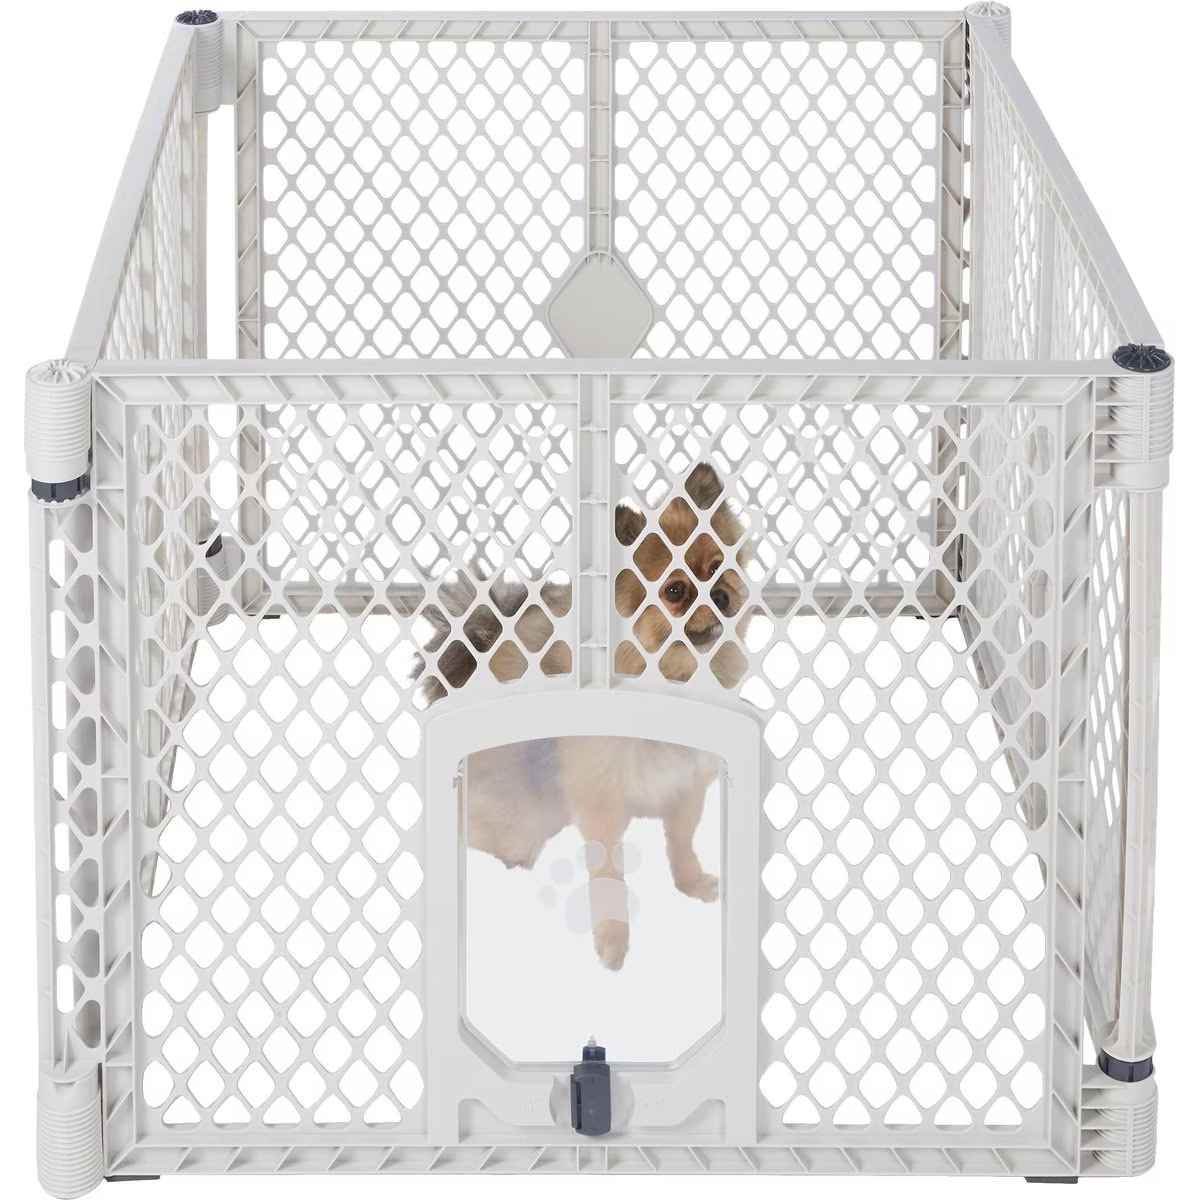 Frisco 4-Panel Convertible Plastic Playpen Divider with Wall Mounts